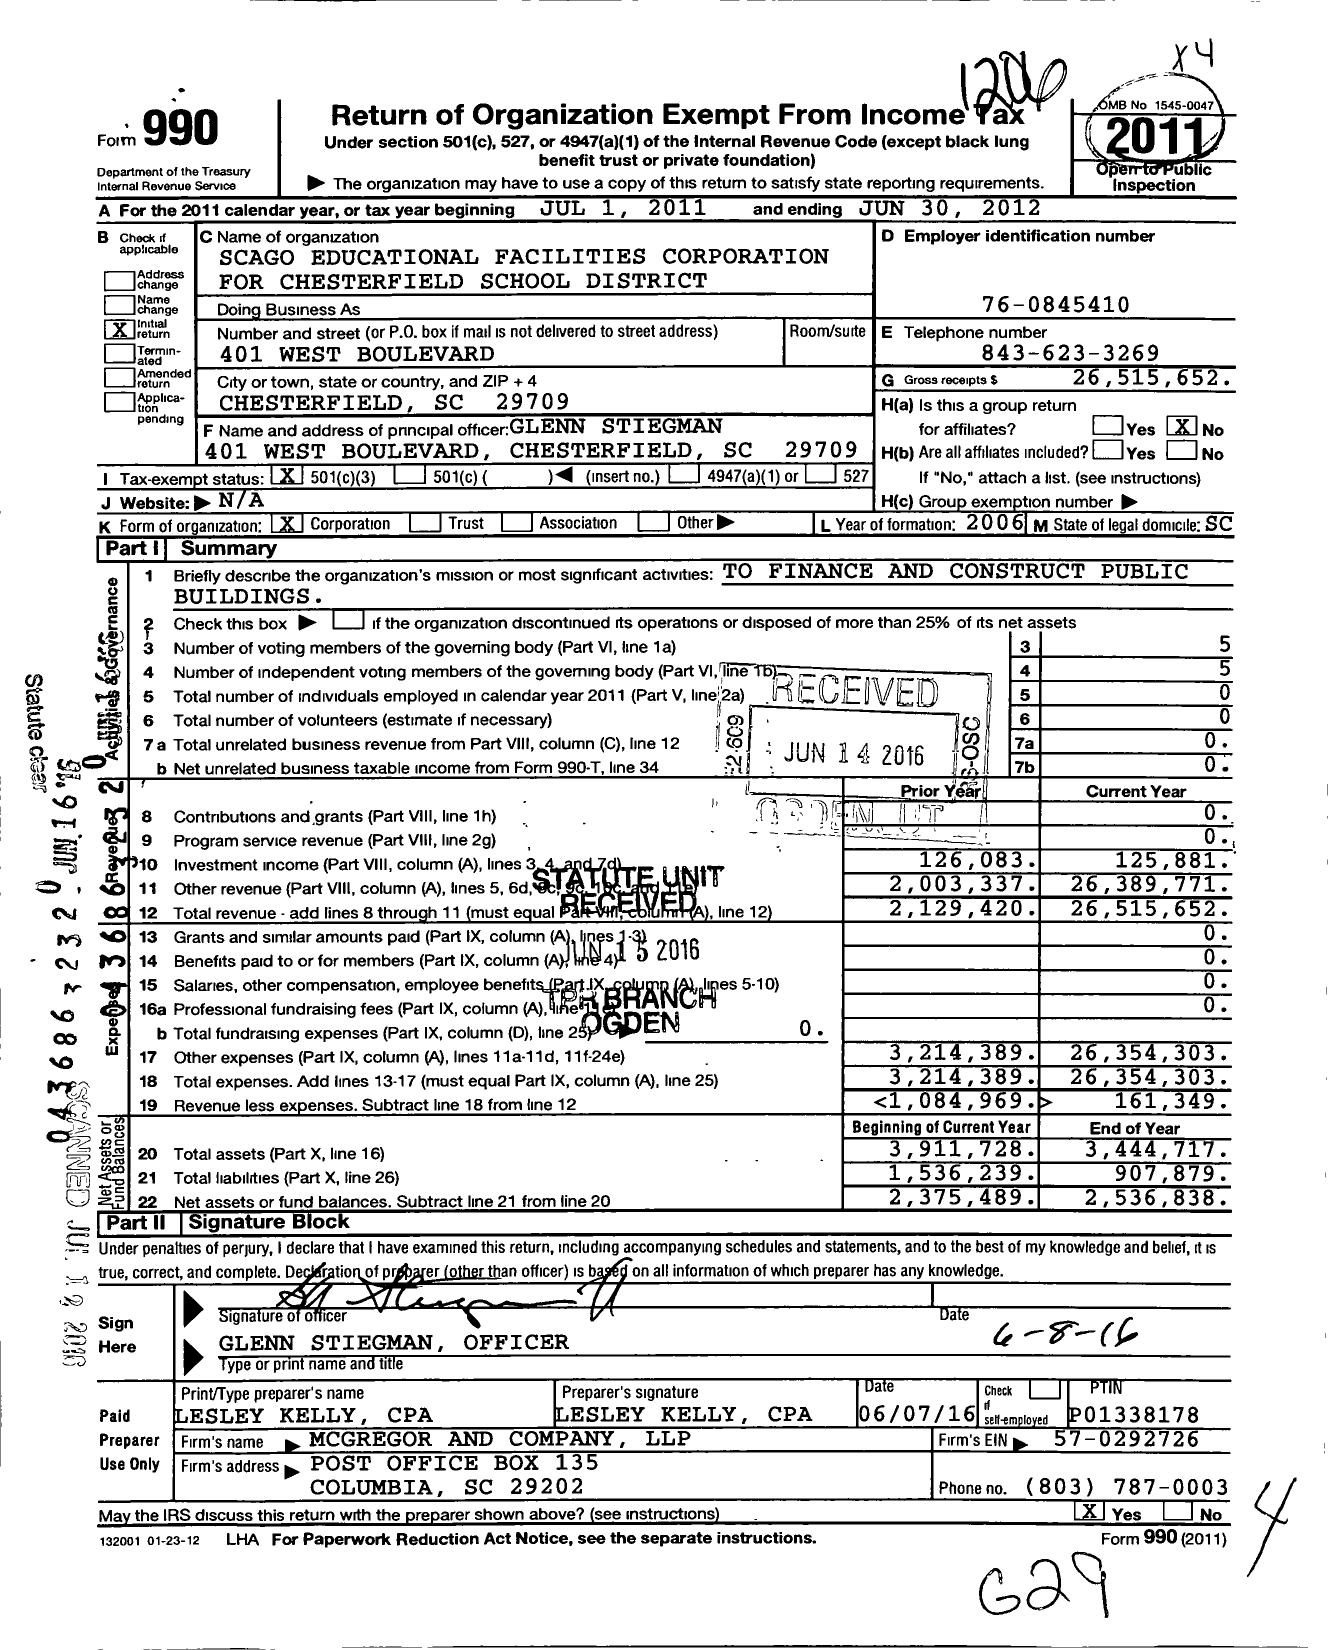 Image of first page of 2011 Form 990 for Scago Educational Facilities Corporation for Chesterfield School